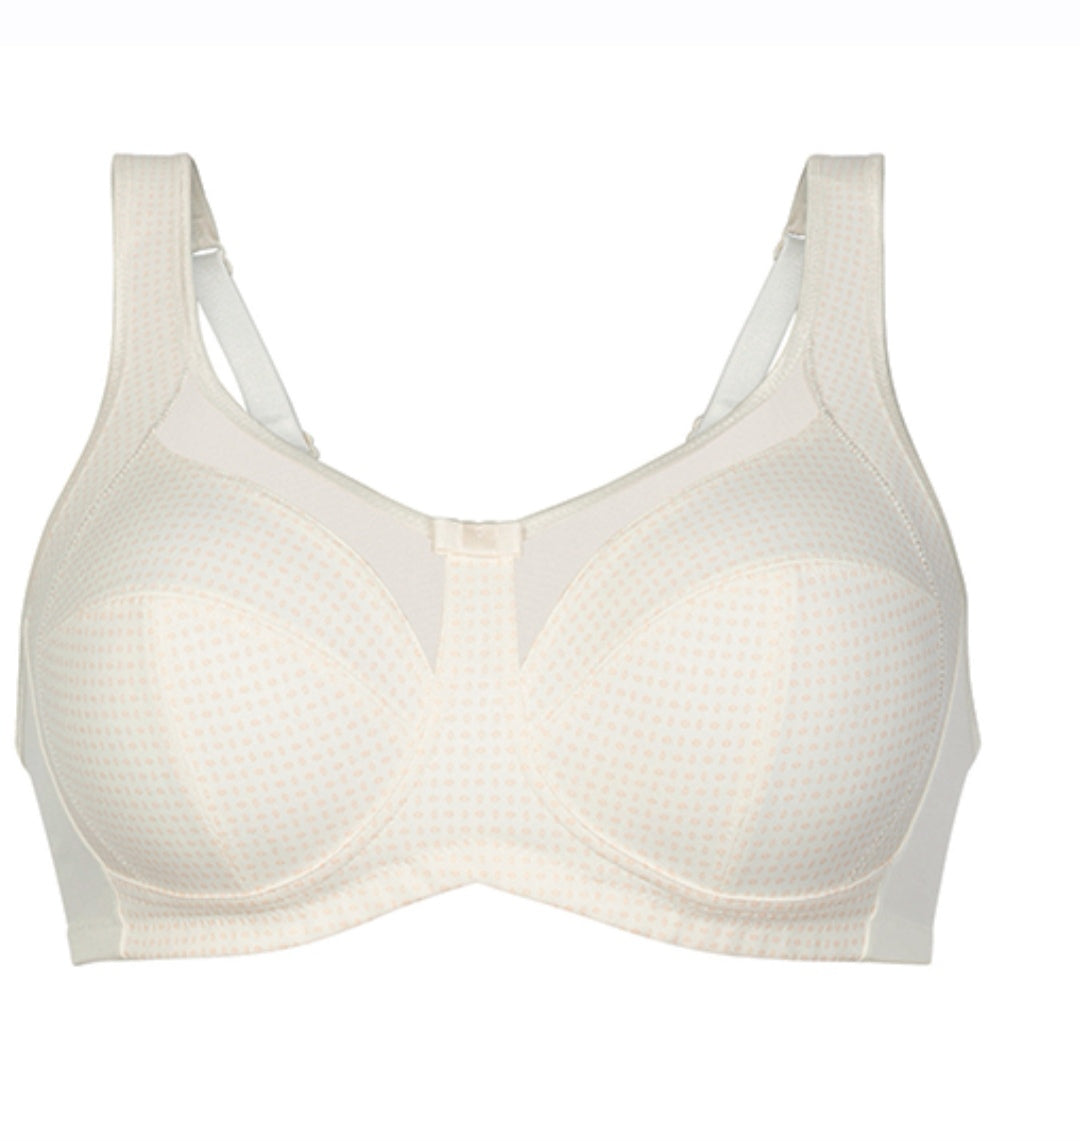 anita care mastectomy bra 5763x Clara champagne with a small pink dot